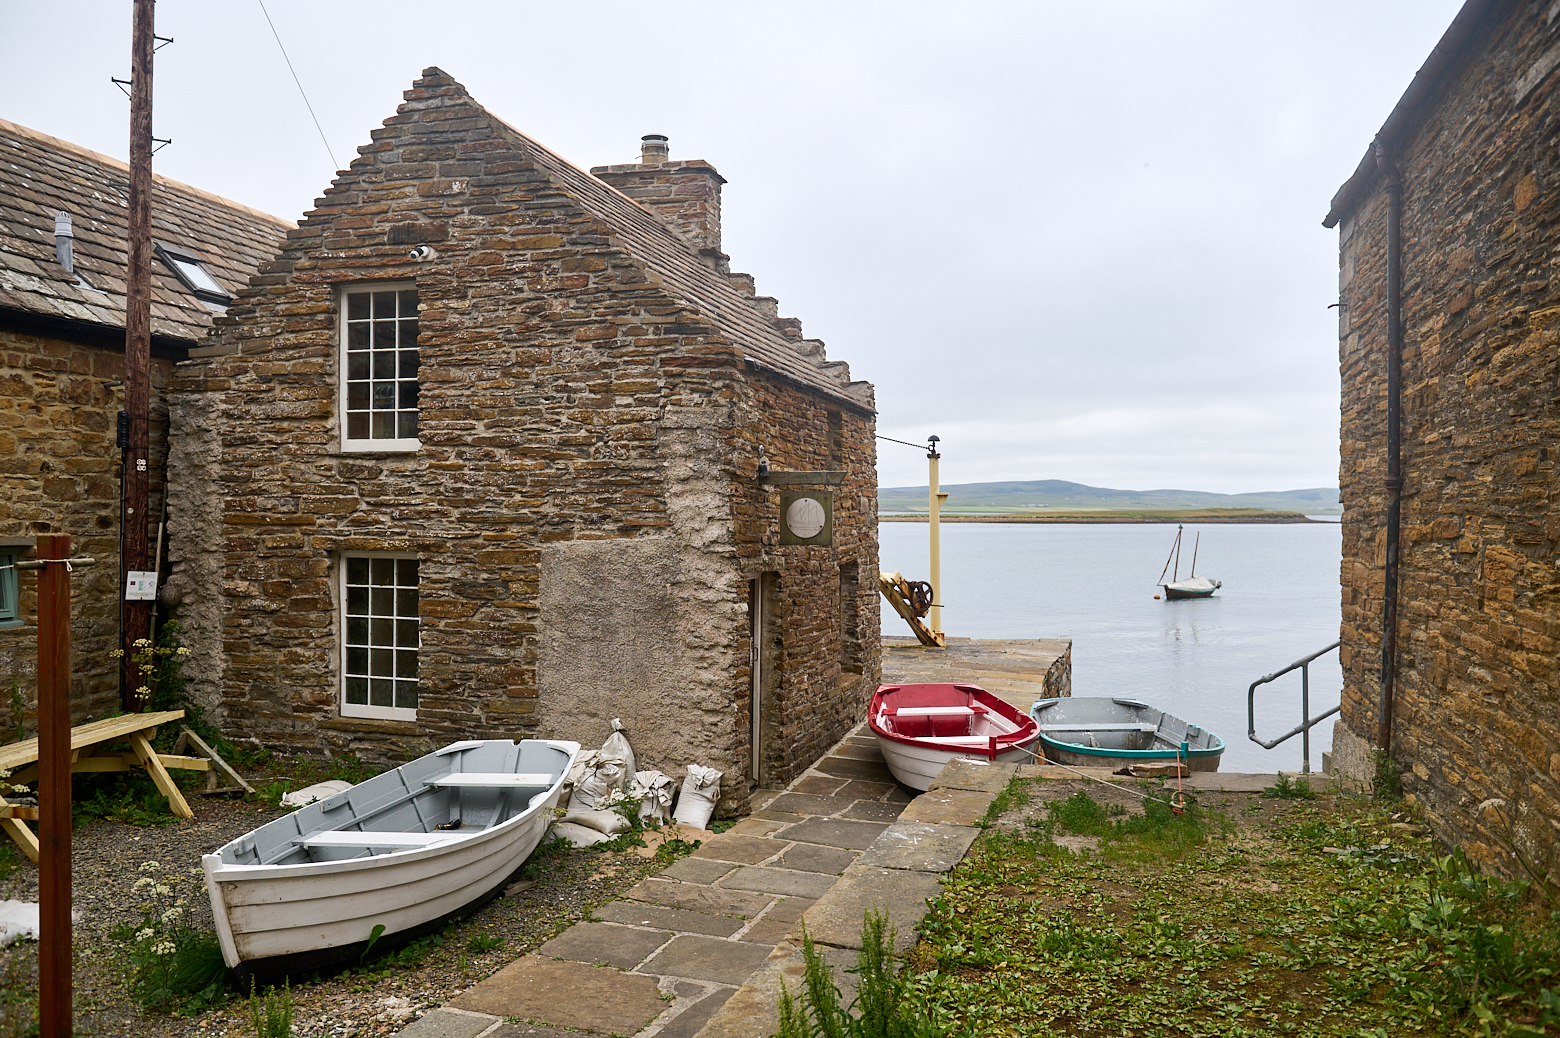 Taking a walk through Stromness, the lovely town in Orkney, Scotland.